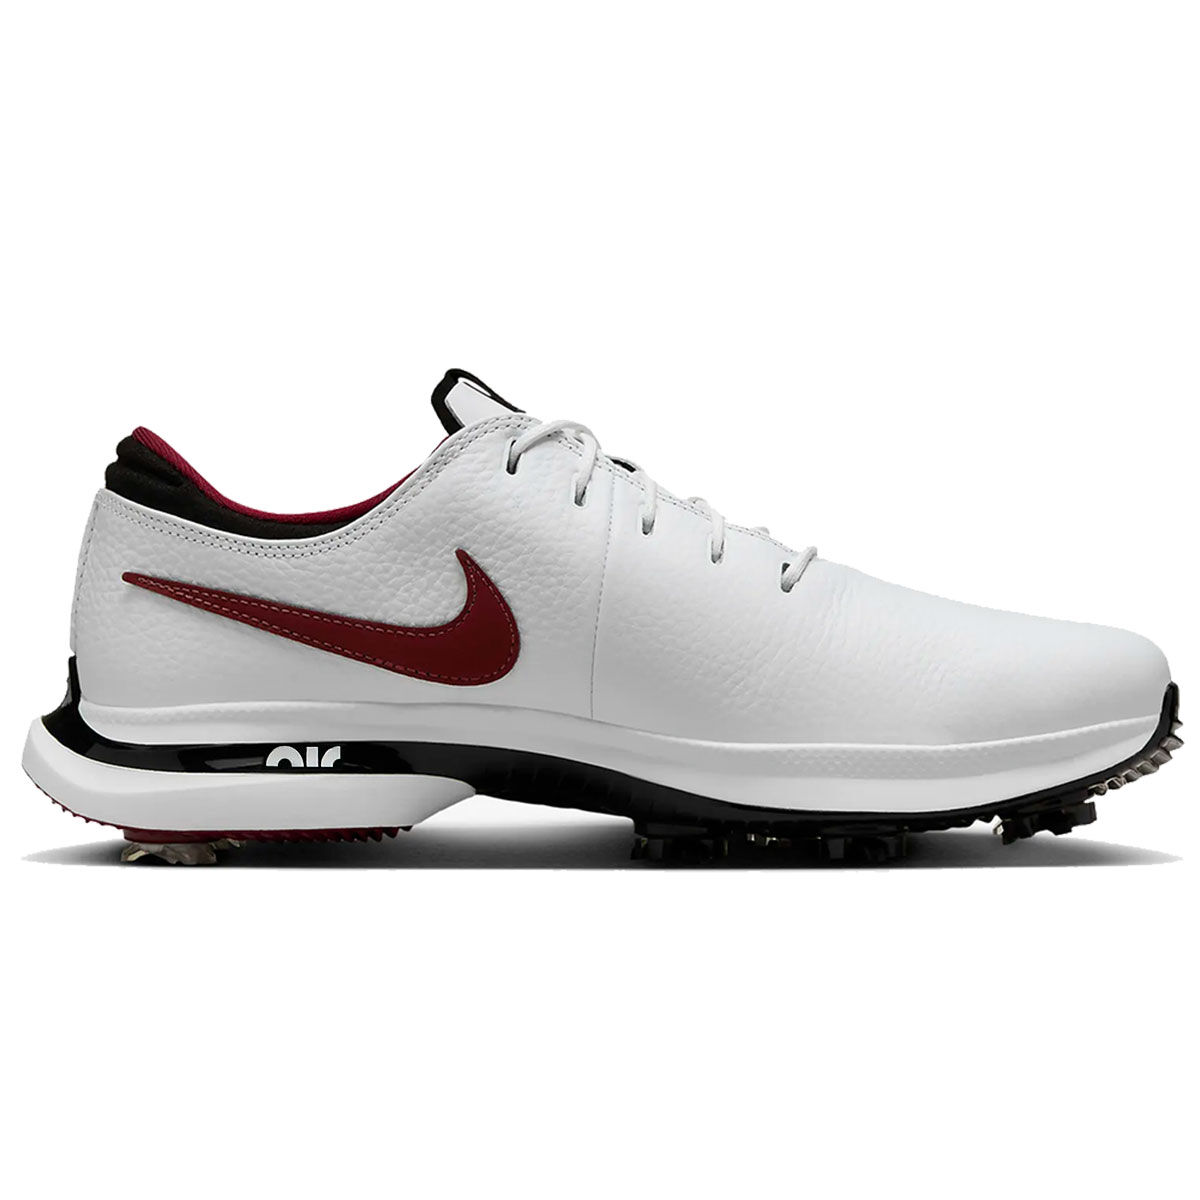 Nike Air Zoom Victory Tour 3 Waterproof Spiked Golf Shoes, Mens, White/red/black, 10 | American Golf von Nike Golf